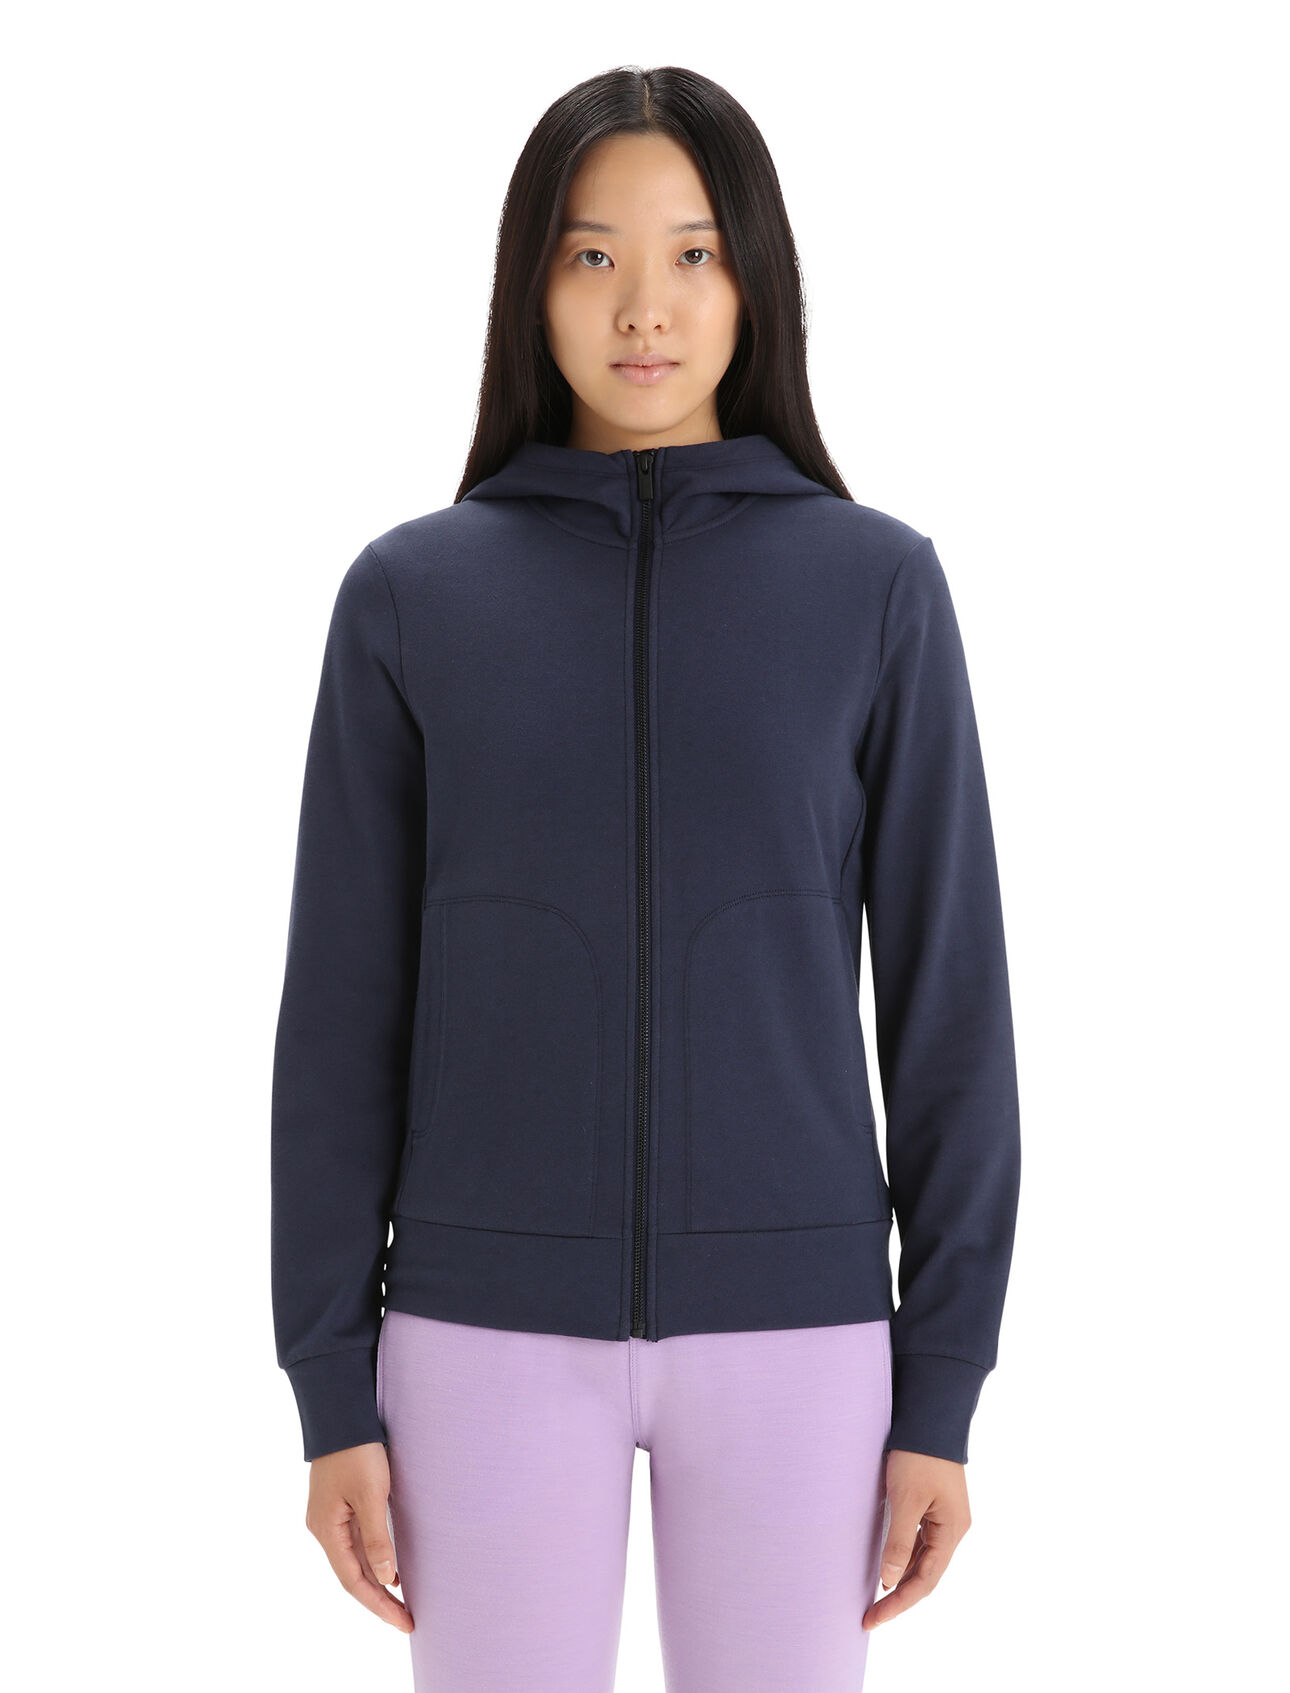 Womens Merino Central Classic Long Sleeve Zip Hoodie A comfy, classic and stylish everyday hooded sweatshirt that blends natural merino wool with organic cotton, the Central Classic Long Sleeve Zip Hoodie is durable, breathable and incredibly versatile.